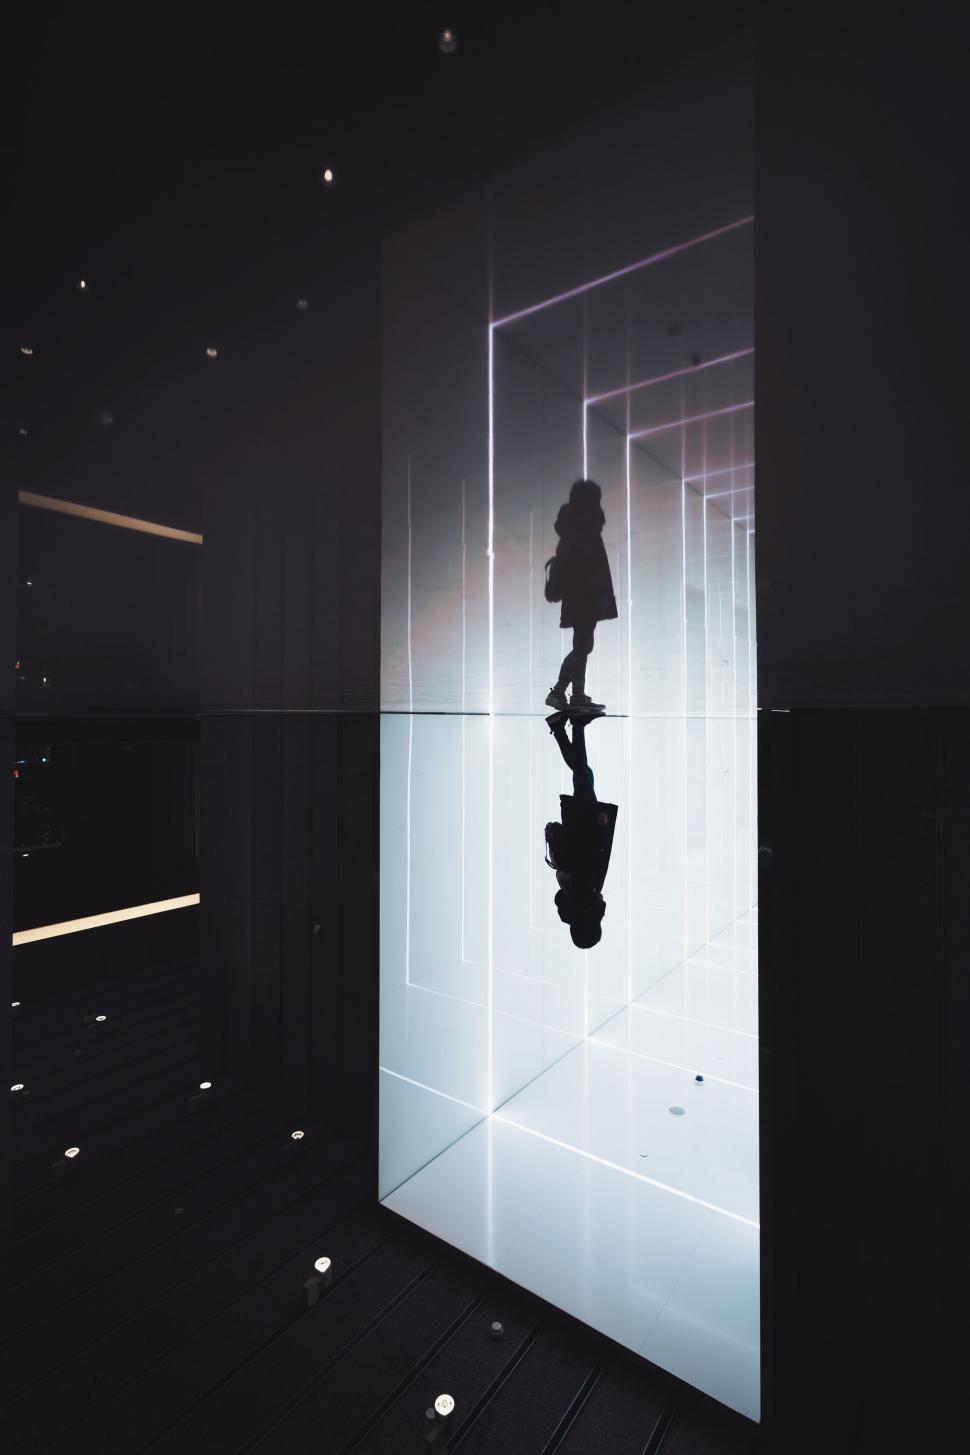 Free Image of A person standing in a room with a mirror 